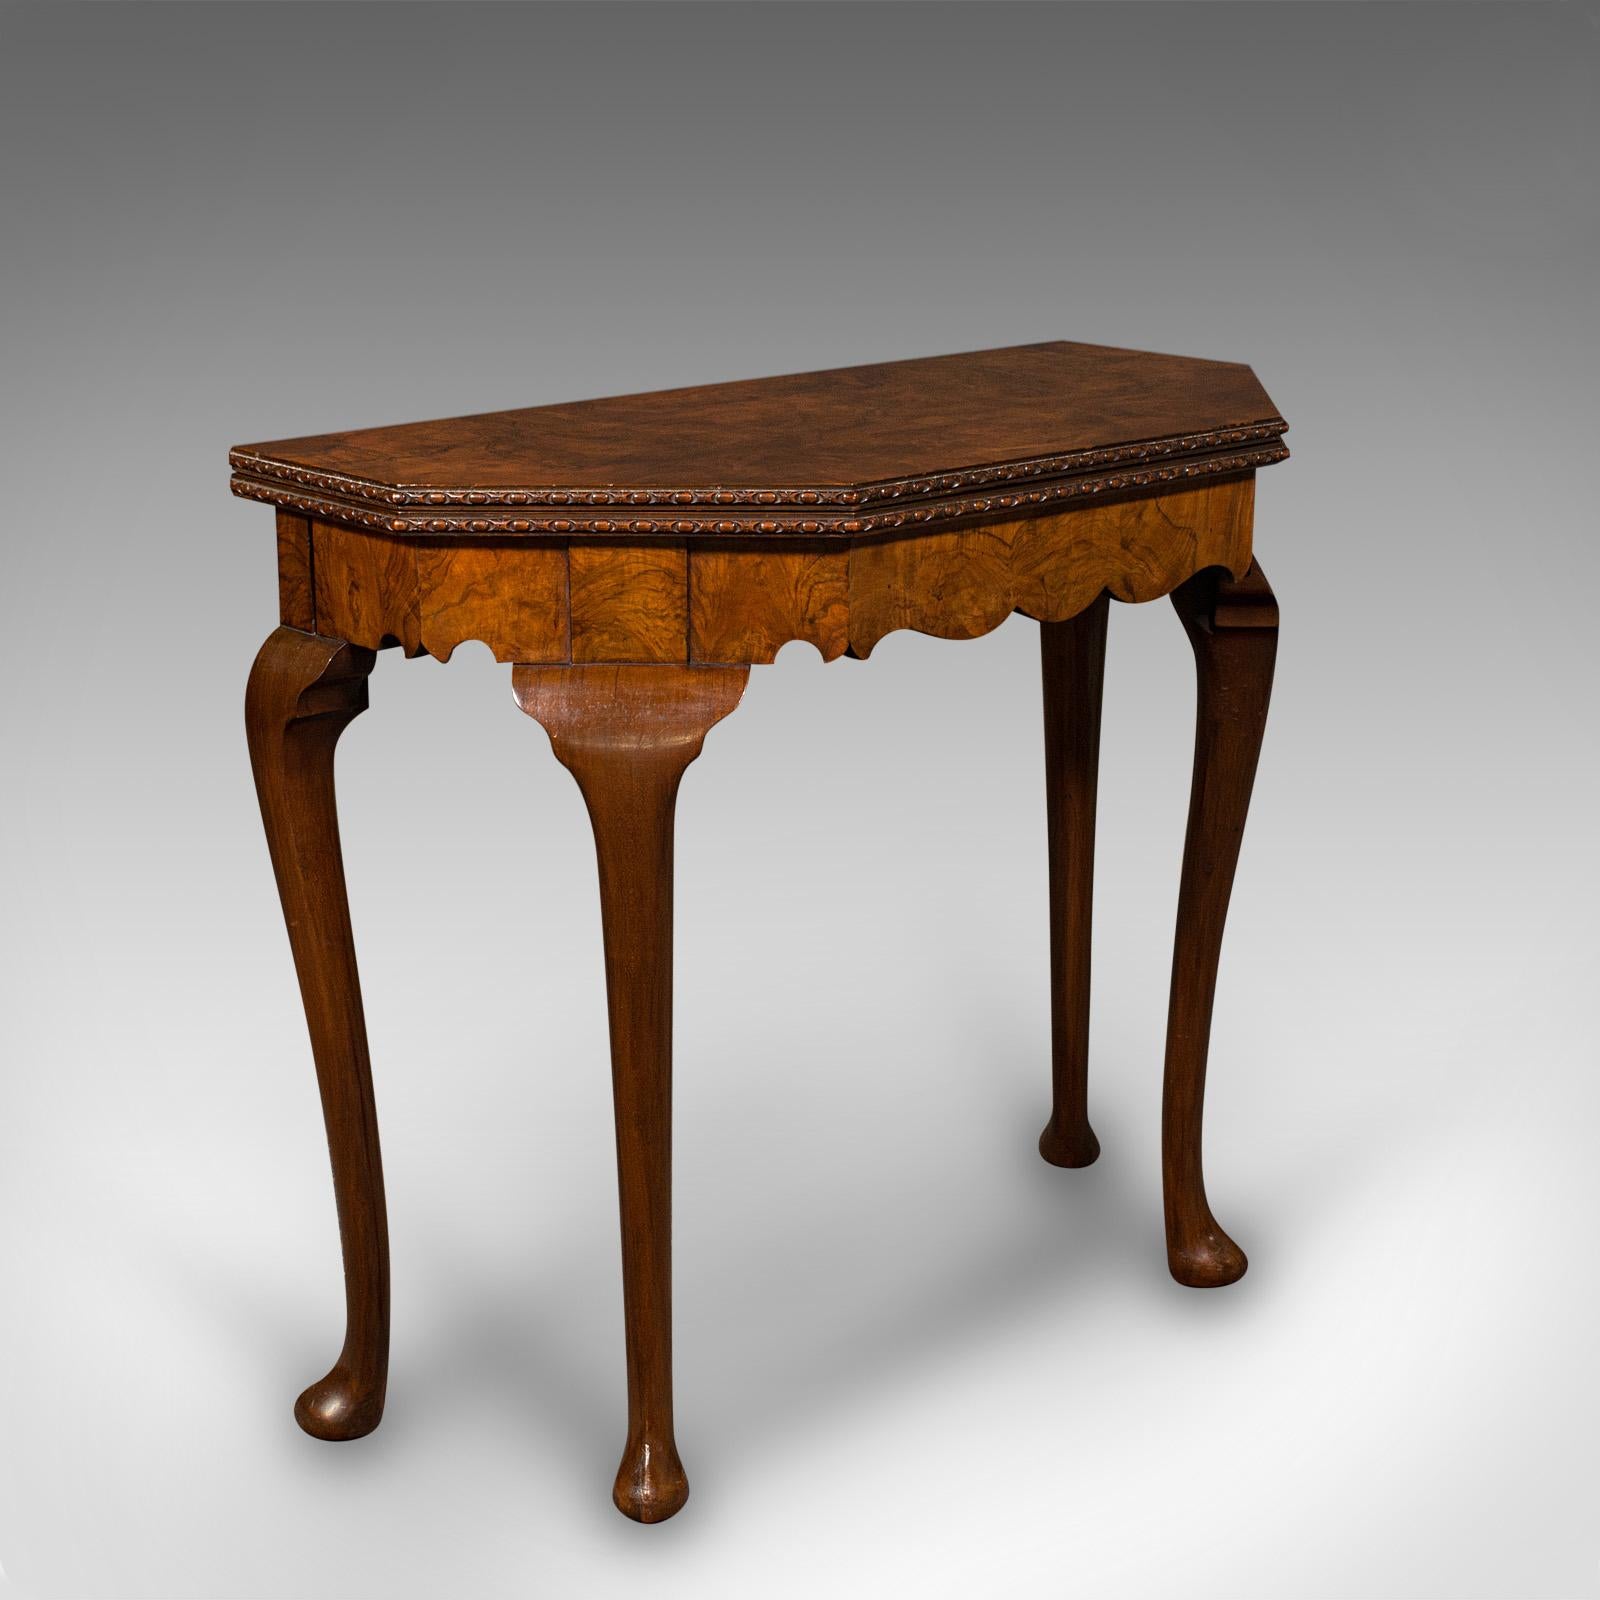 This is an antique fold-over card table. An English, burr walnut games table in Georgian revival taste, dating to the Edwardian period, circa 1910.

Graceful side table, folding out to reveal a delightful playing surface
Displays a desirable aged